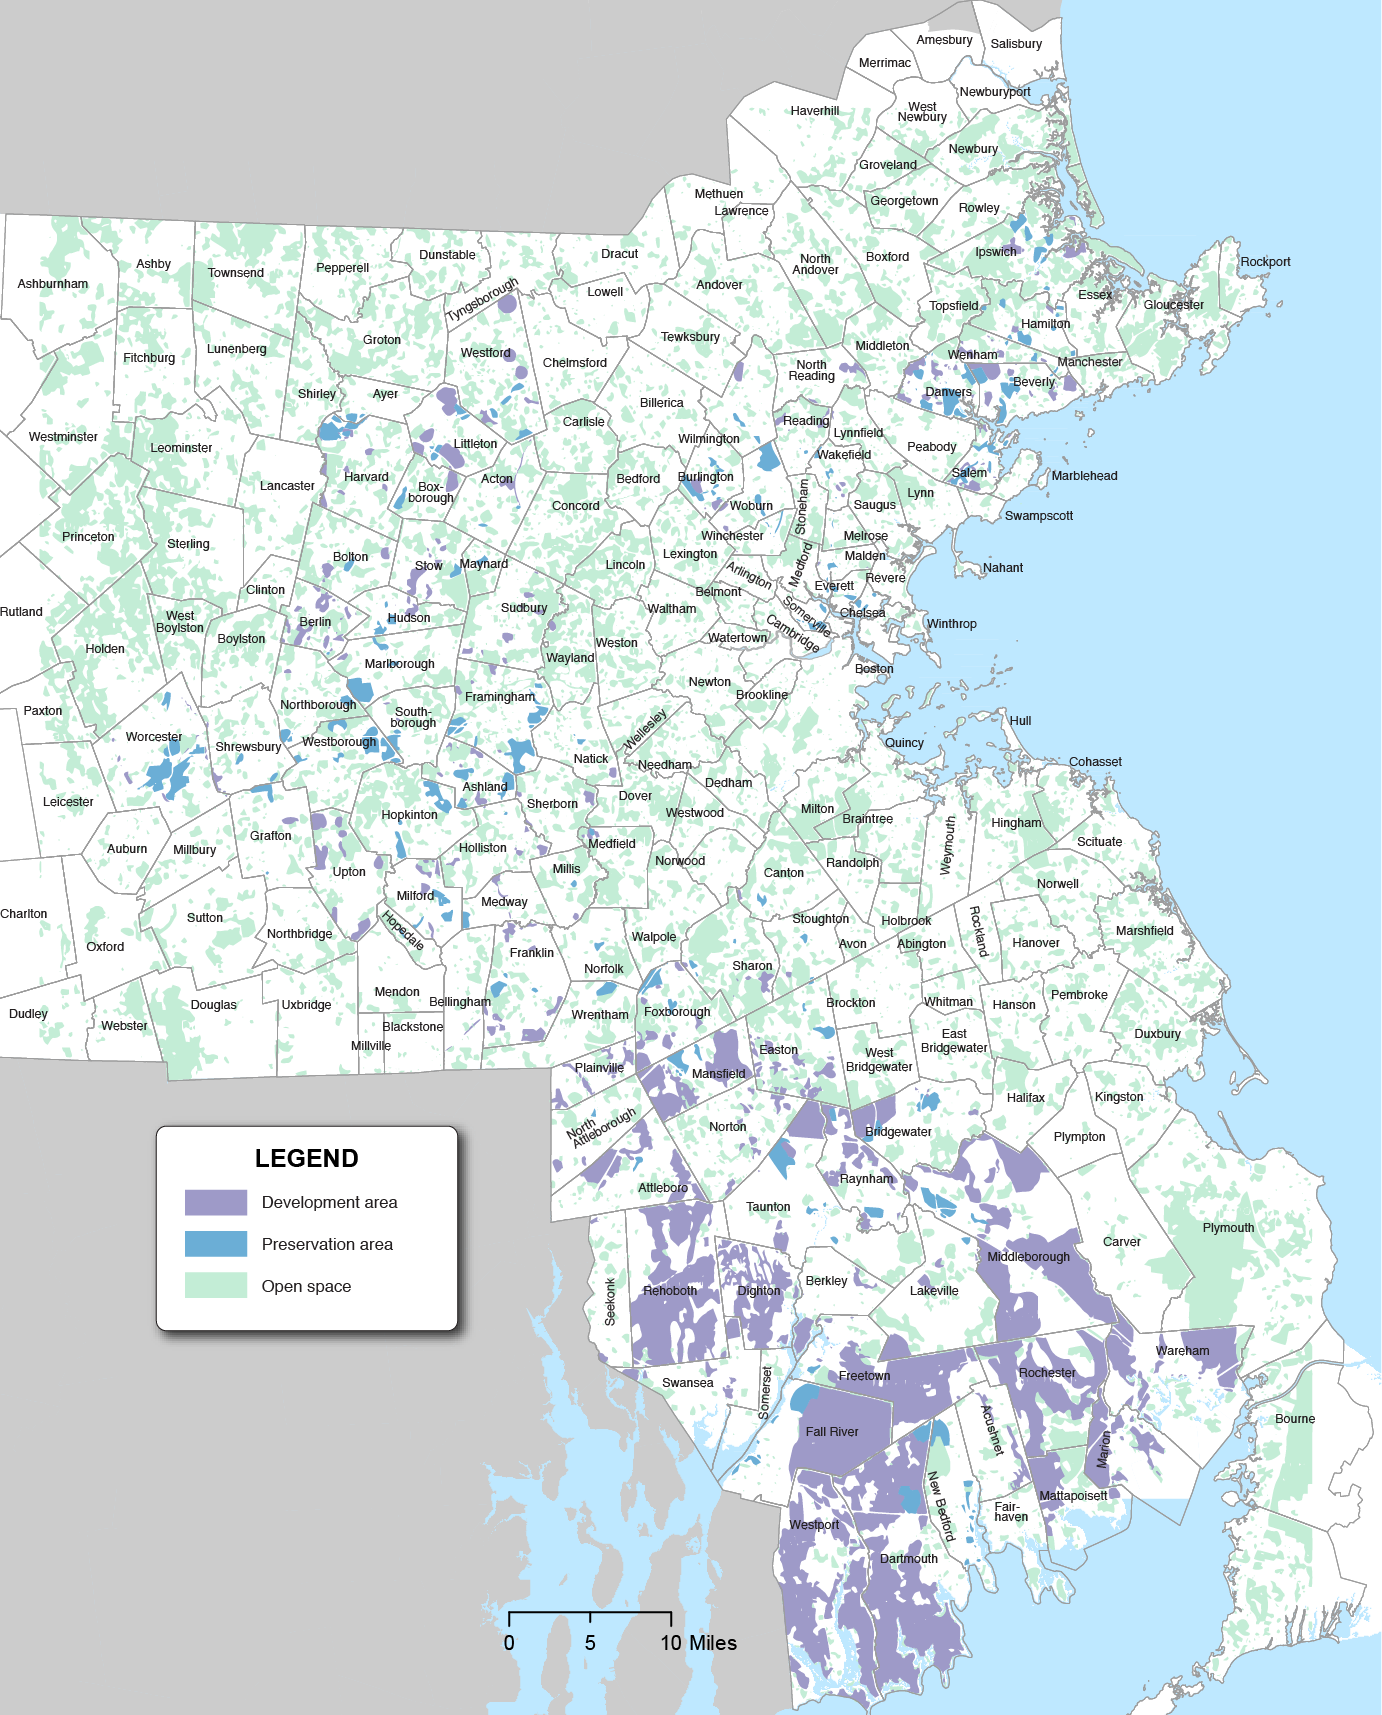 Figure 9-1 is a map of the Boston Region MPO with areas that are regionally significant priority development and preservation areas marked in blue and green respectively.  